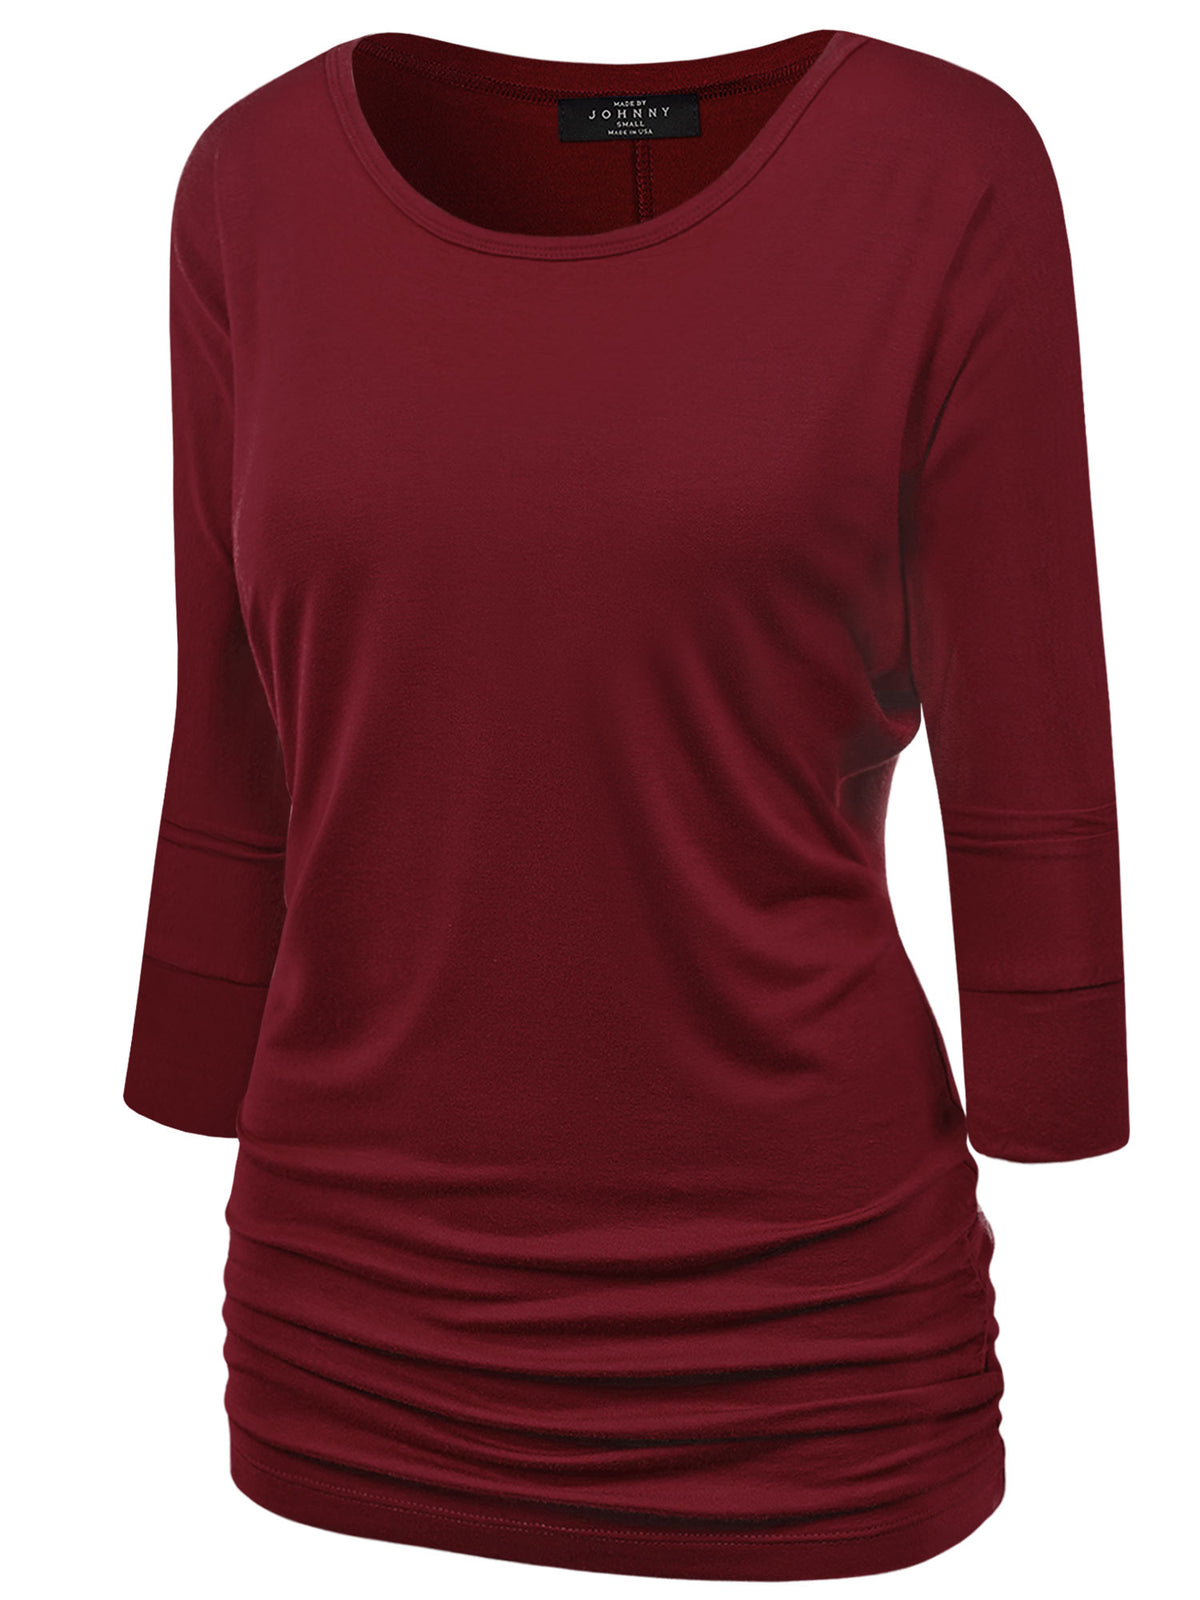 Everyday Solid Color Women's Boat Neck 3/4 Sleeve Drape Dolman Shirt Top with Side Shirring